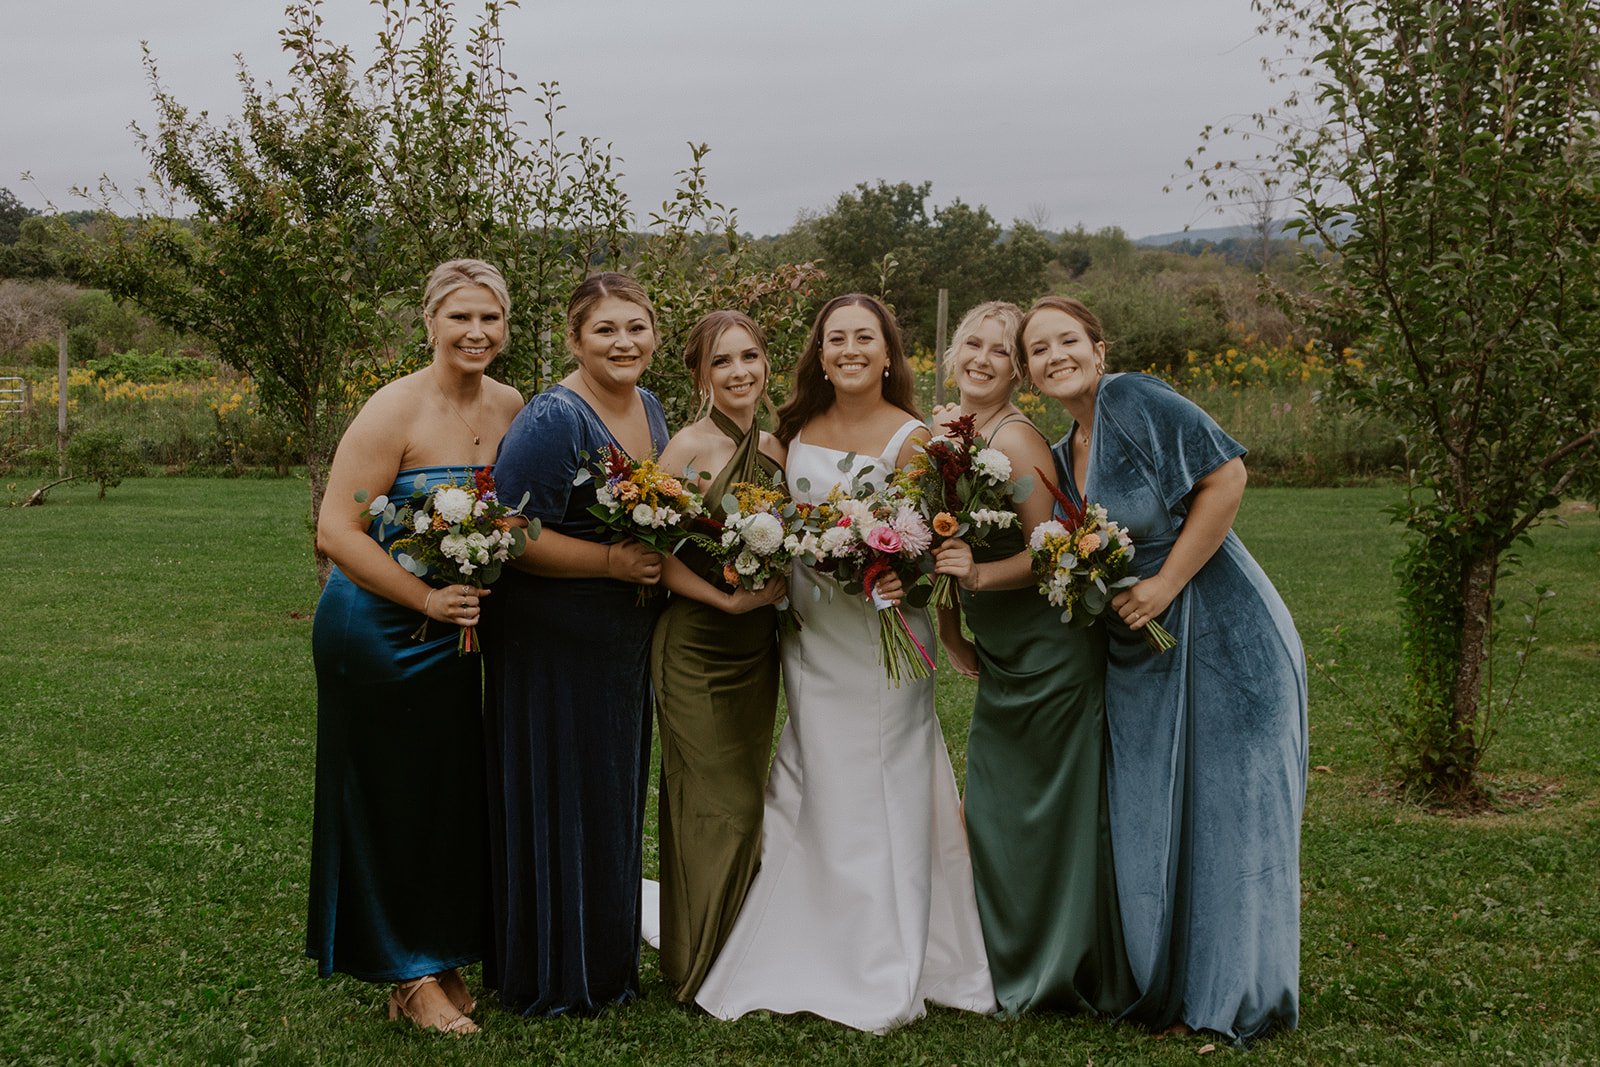 The bride and her maids posing together in beautiful shades of blue and green. 